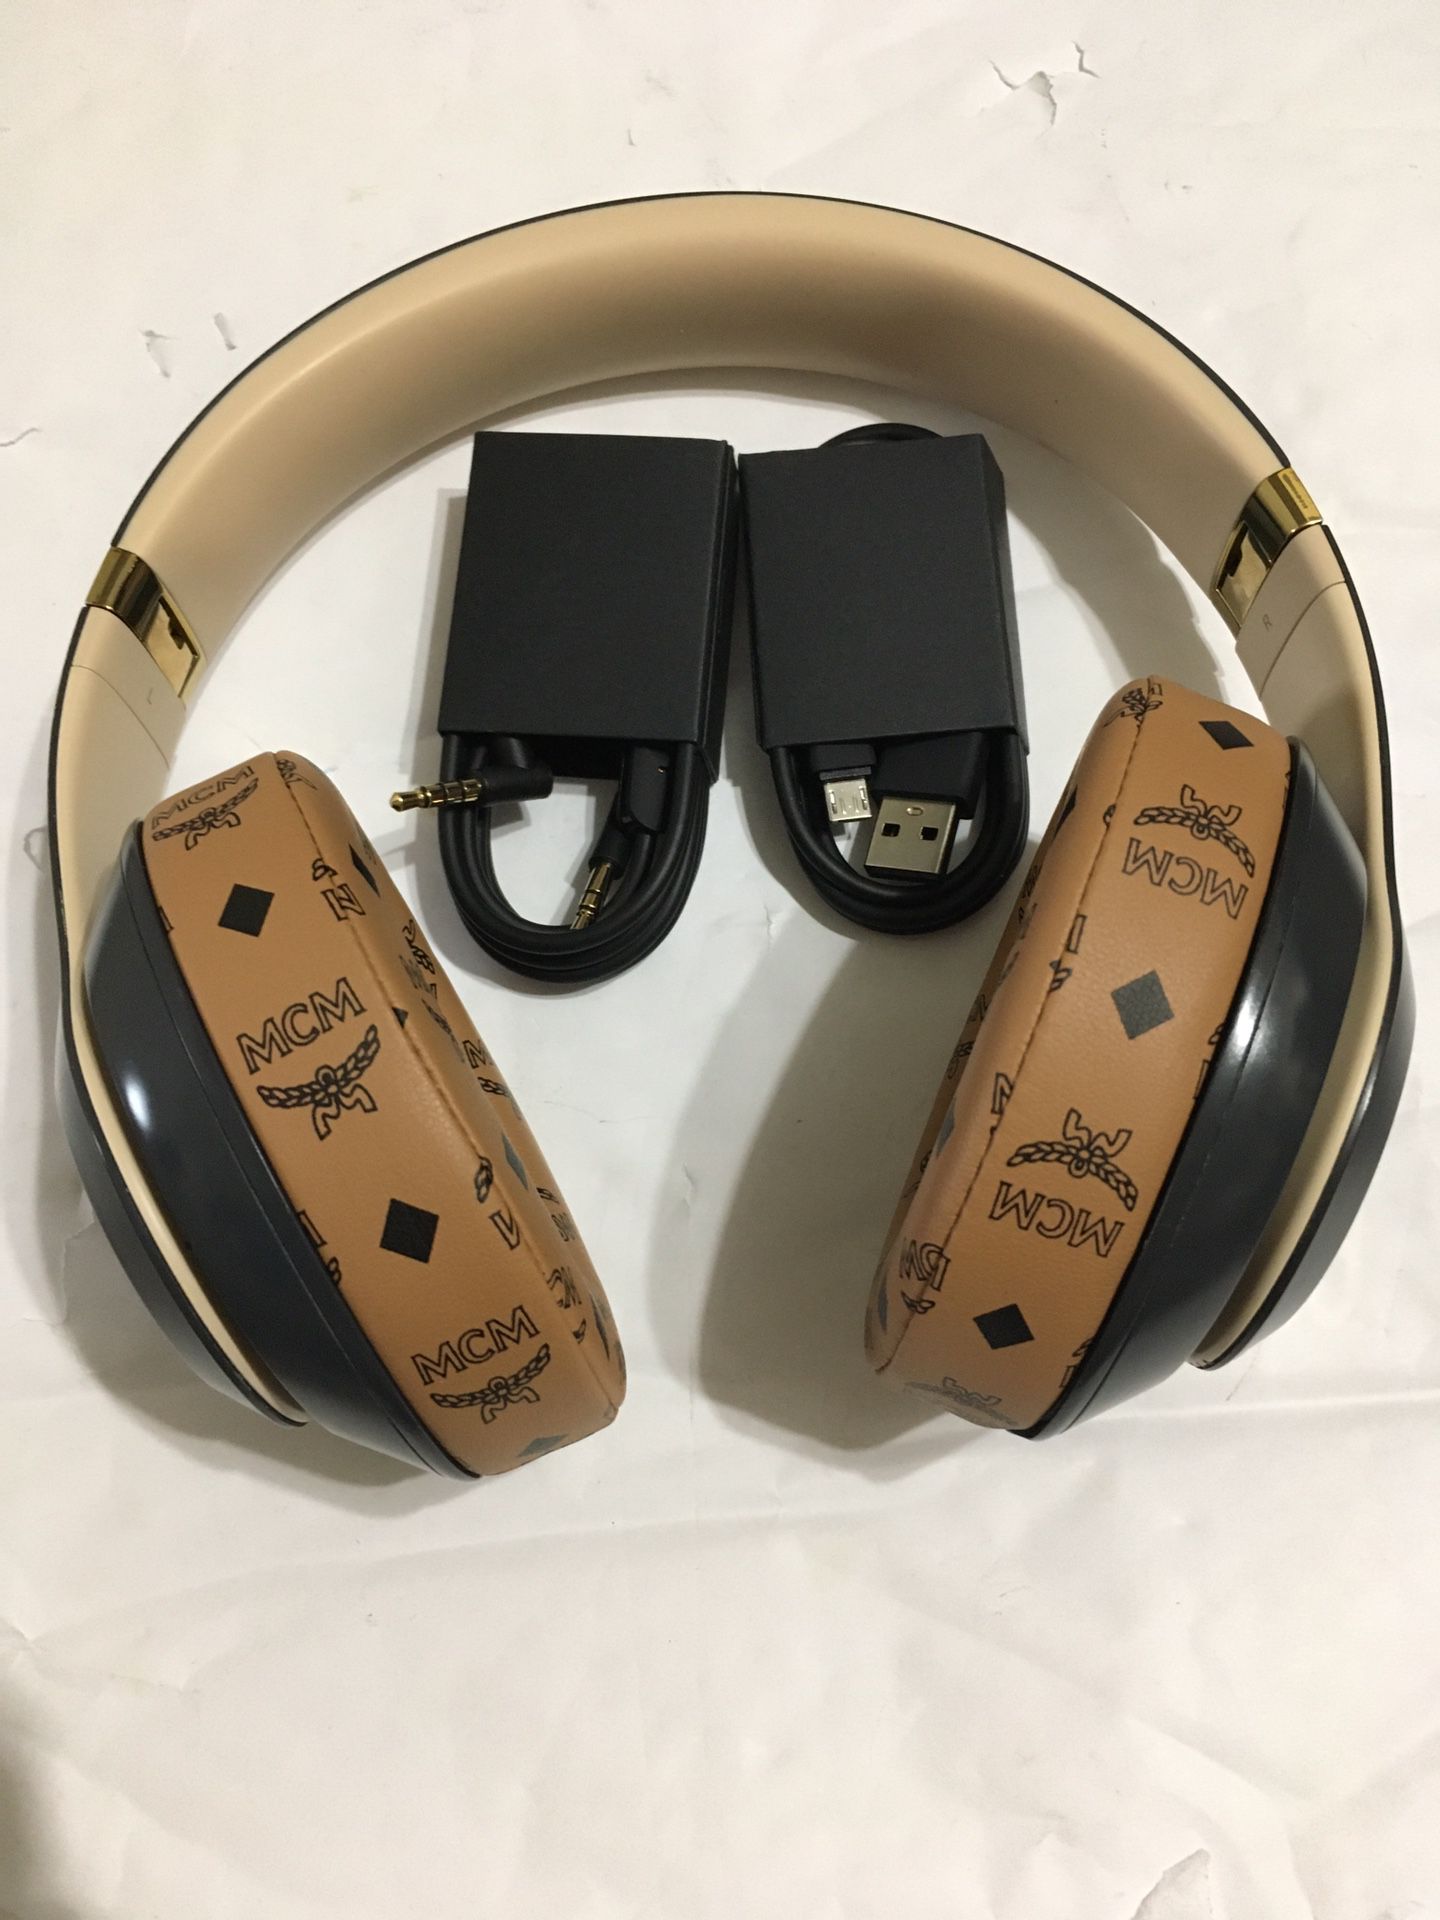 Beats Studio3 Wireless ANC Headphones Shadow Grey MCM Limited Edition Cushion  Comes with aux cable and charger cable . In good working condition  